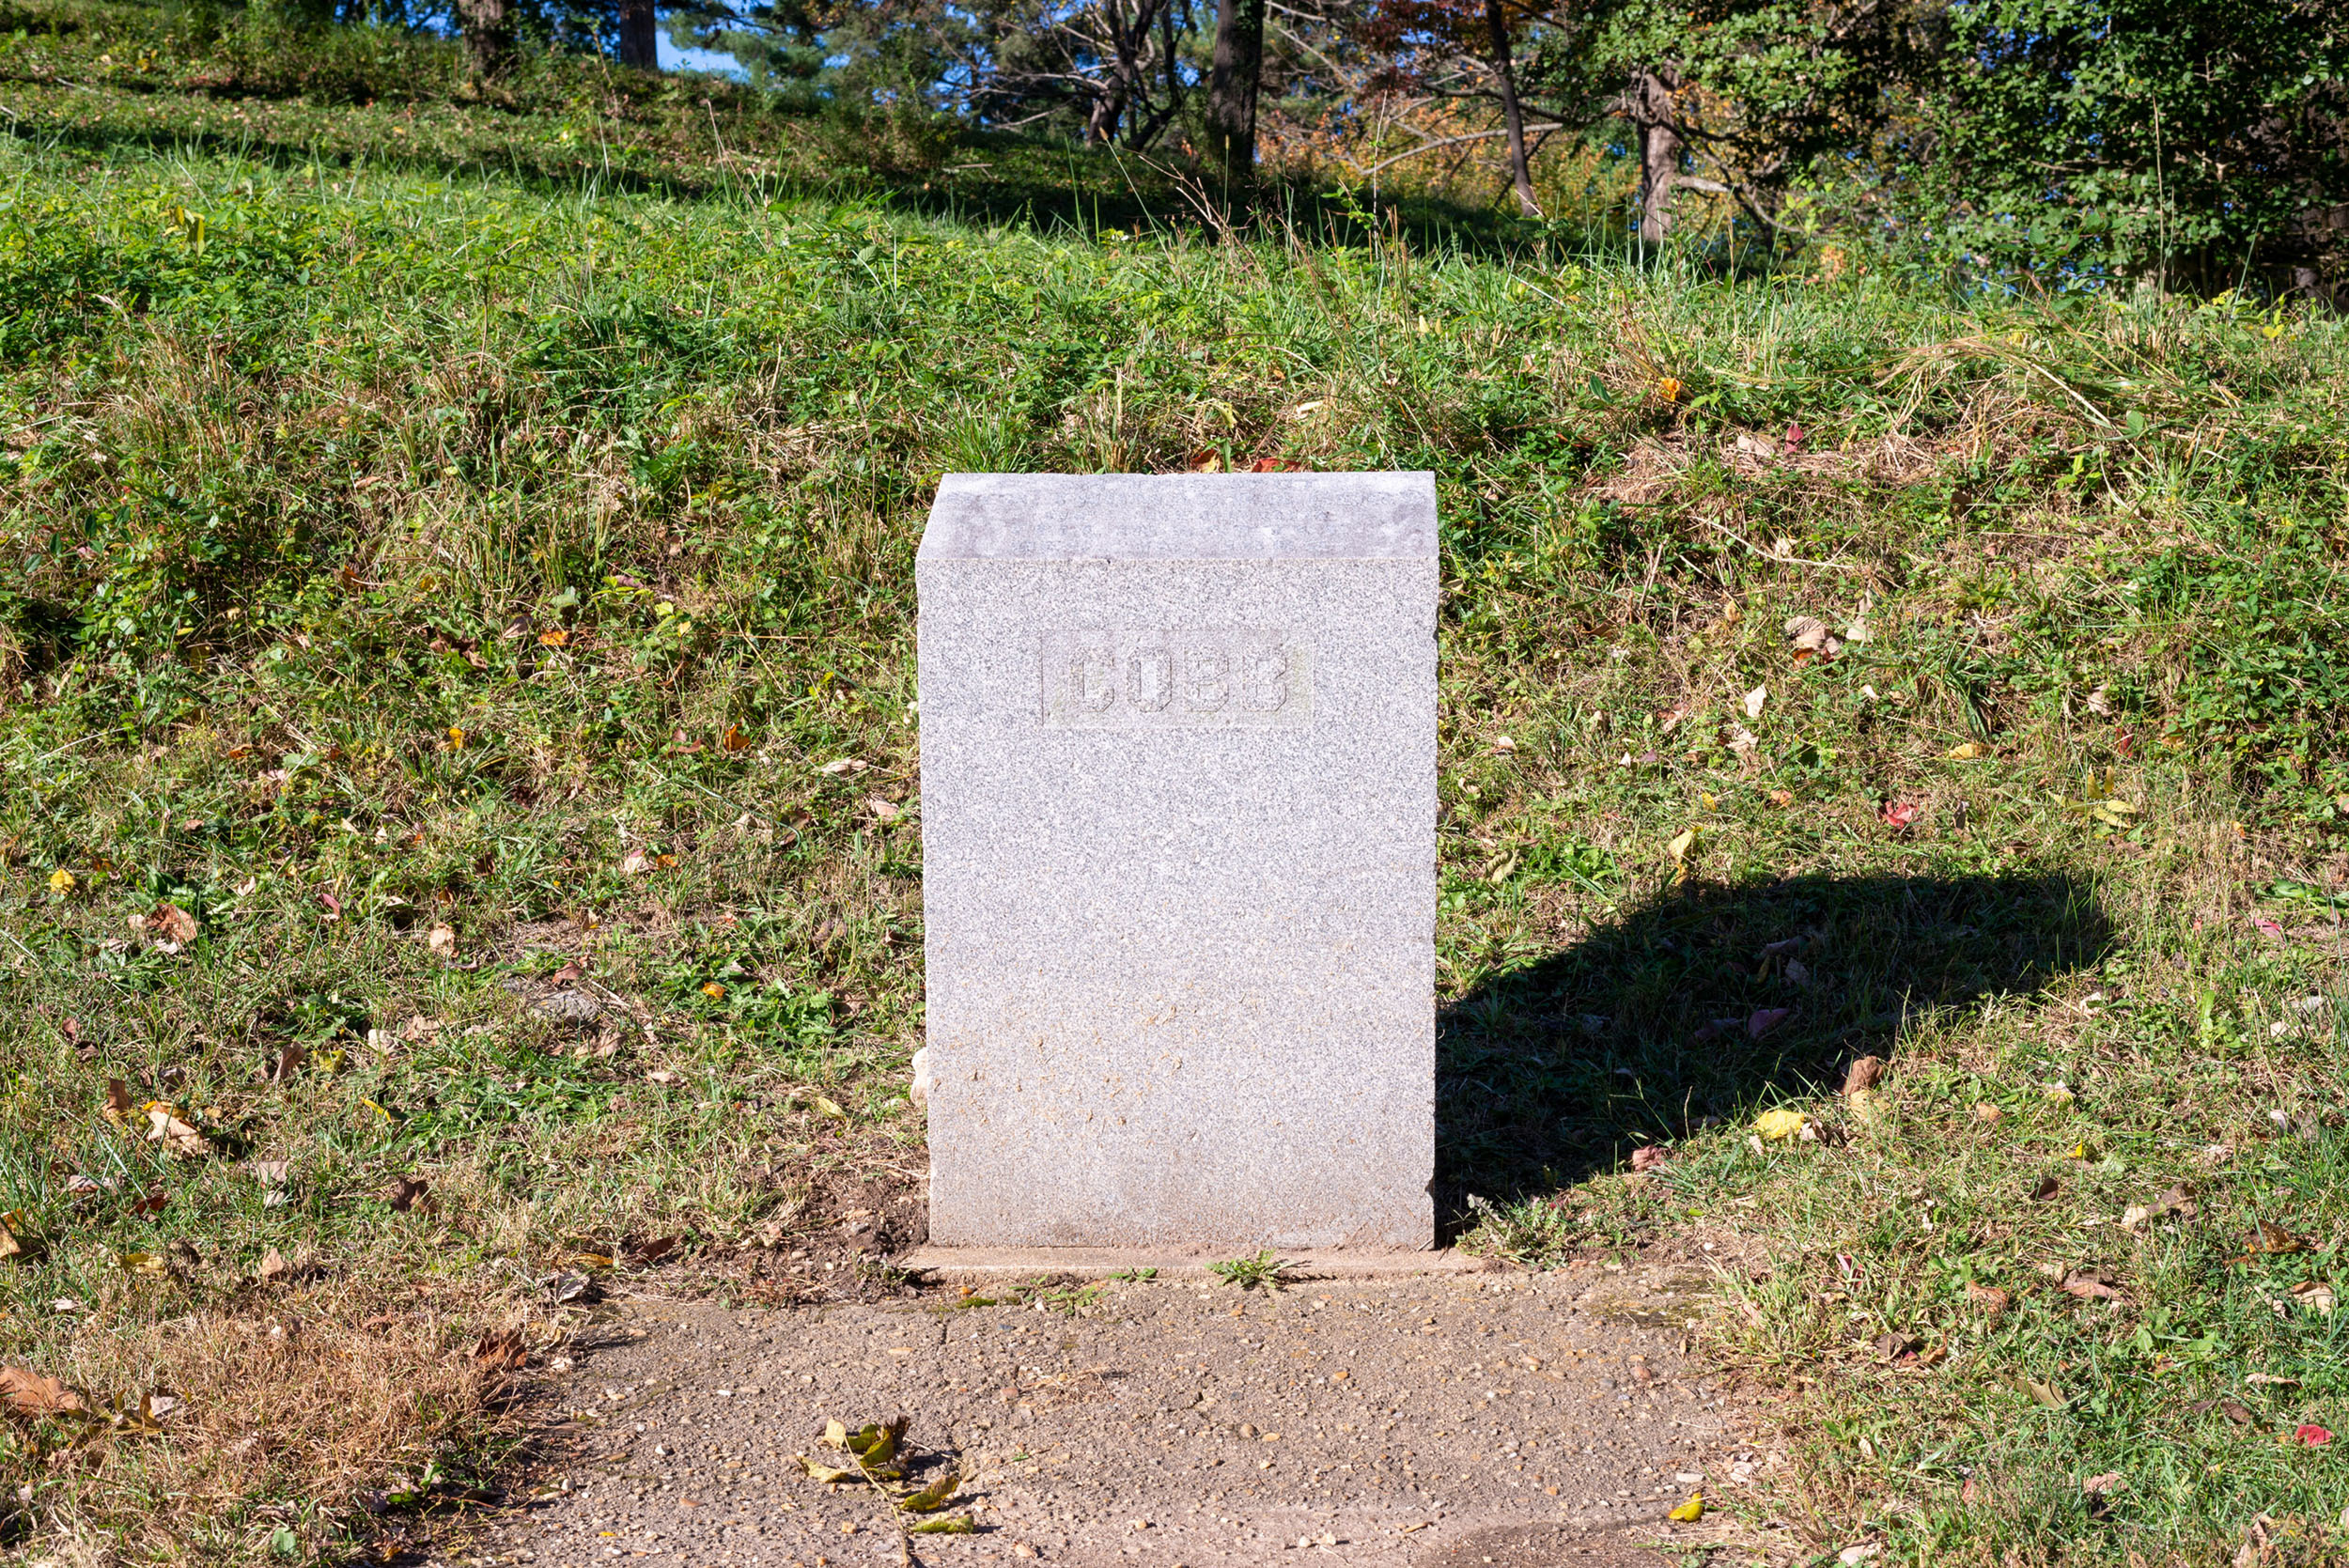 A rectangular granite monument with the word Cobb written on it.